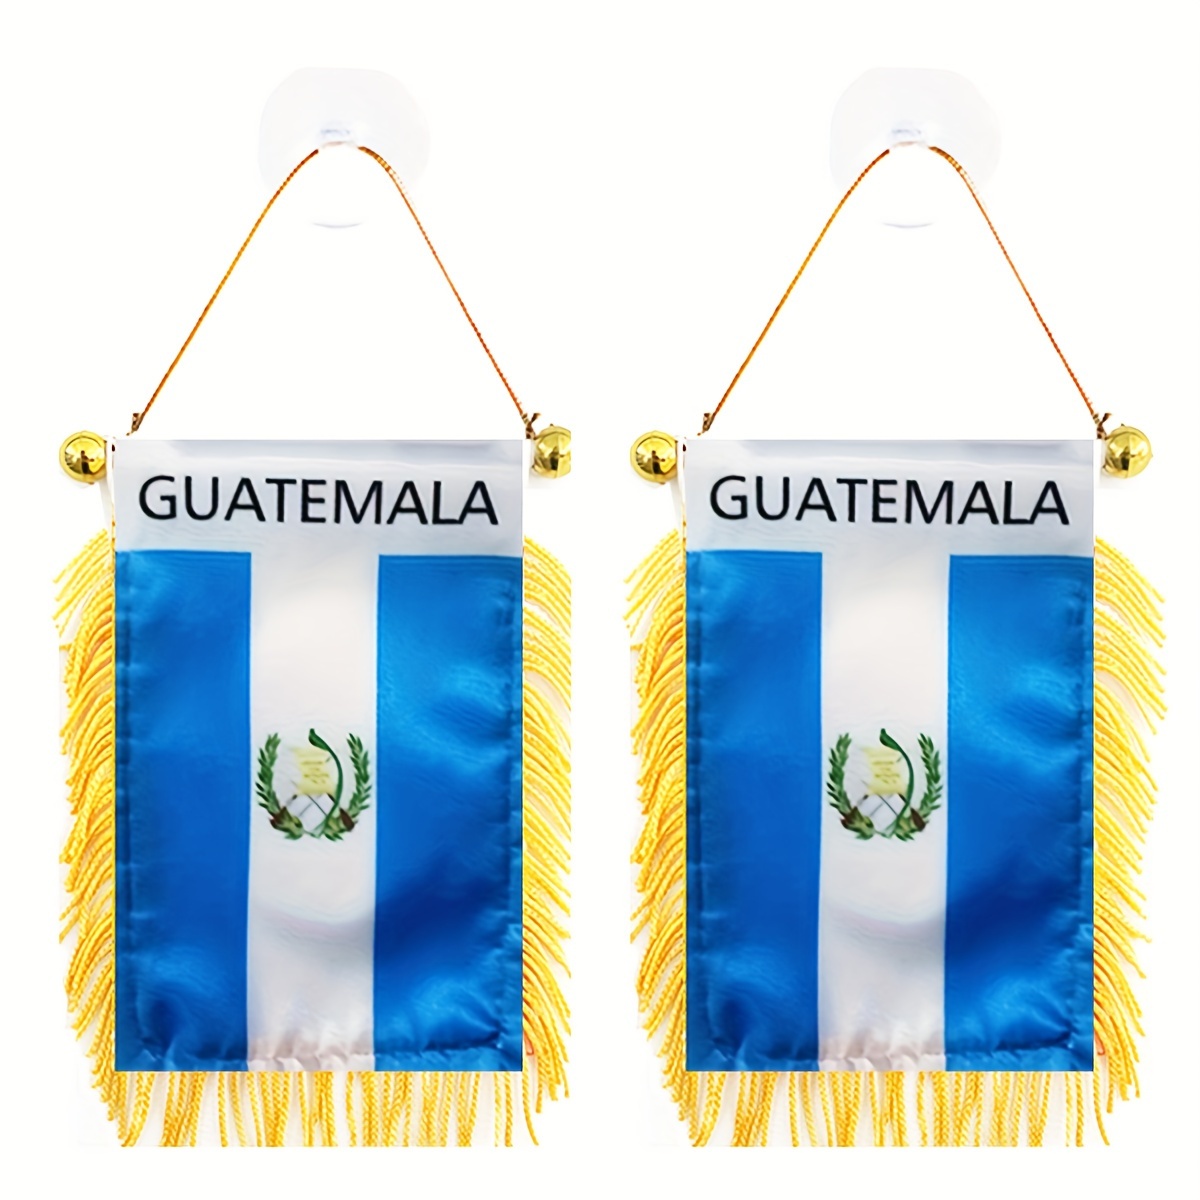 

2pcs, Guatemala Window Hanging Flag, 3x4inch 8x12cm Double Side Mini Flag Banner Car Rearview Mirror Decor Fringed Hanging Flag With Suction Cup